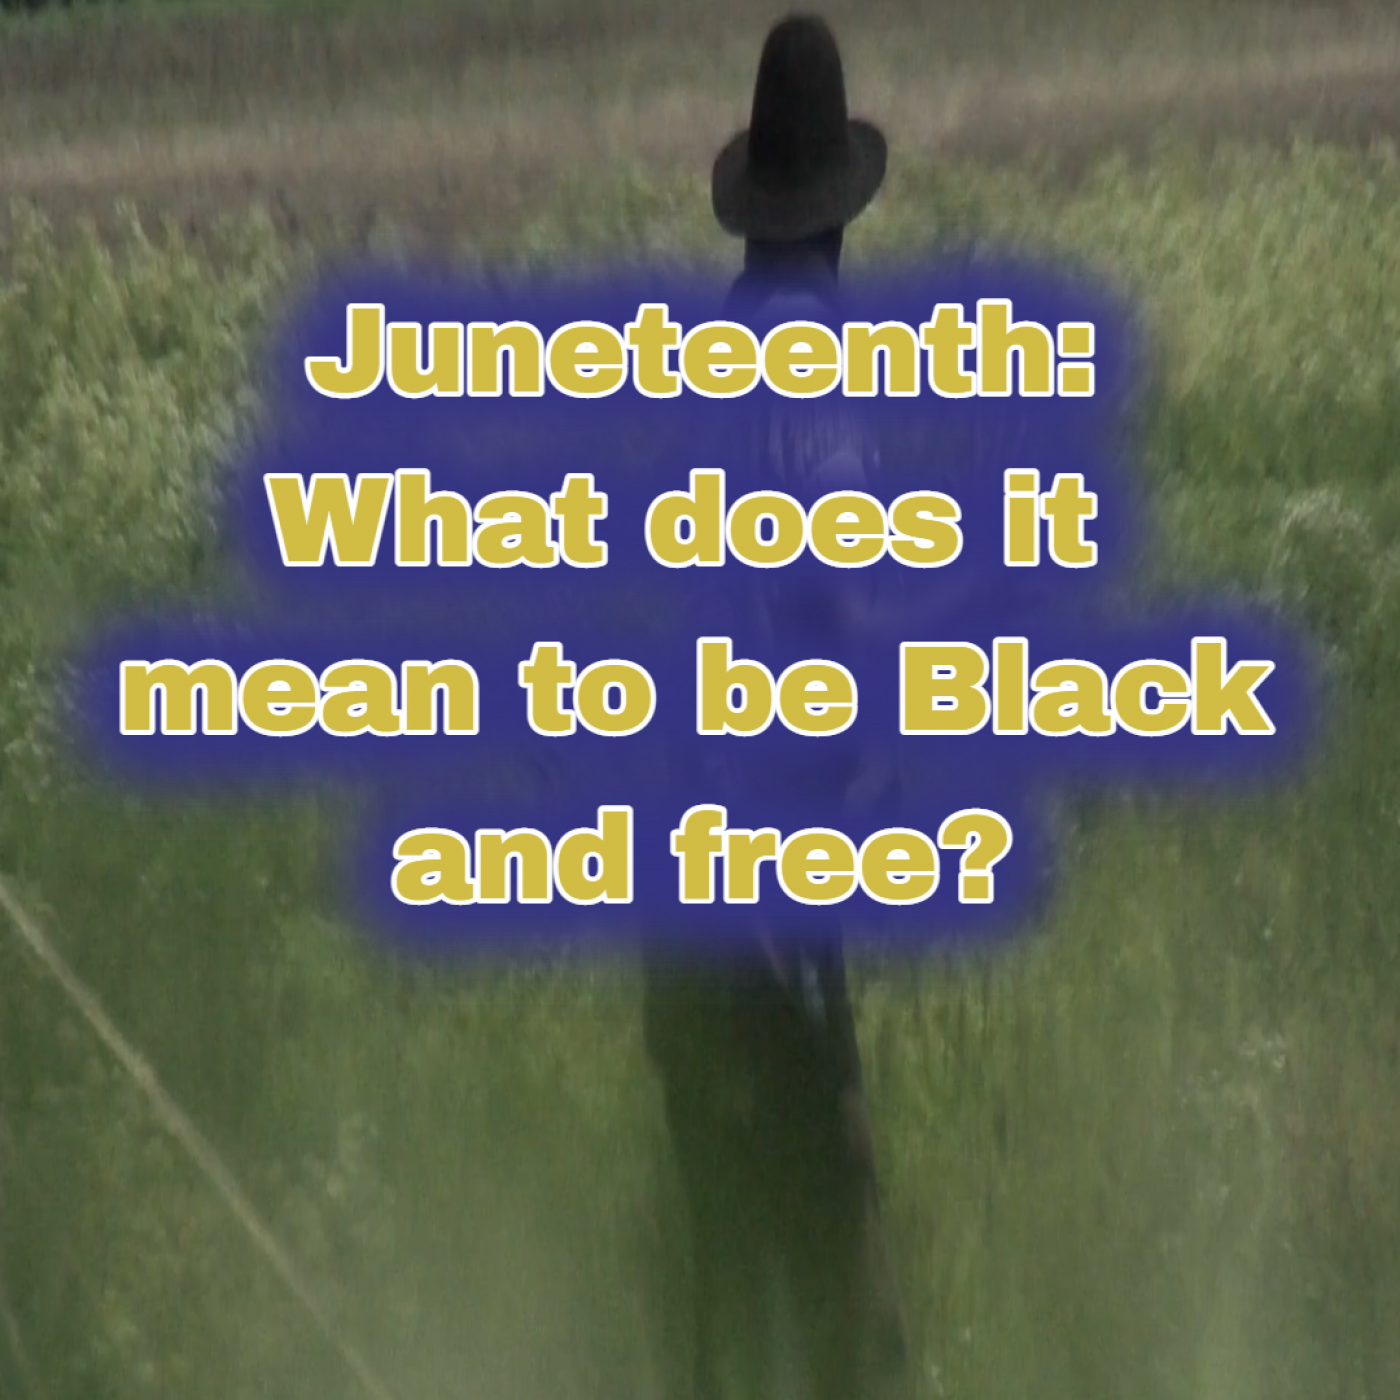 What Does It Mean to be Black and Free? Image